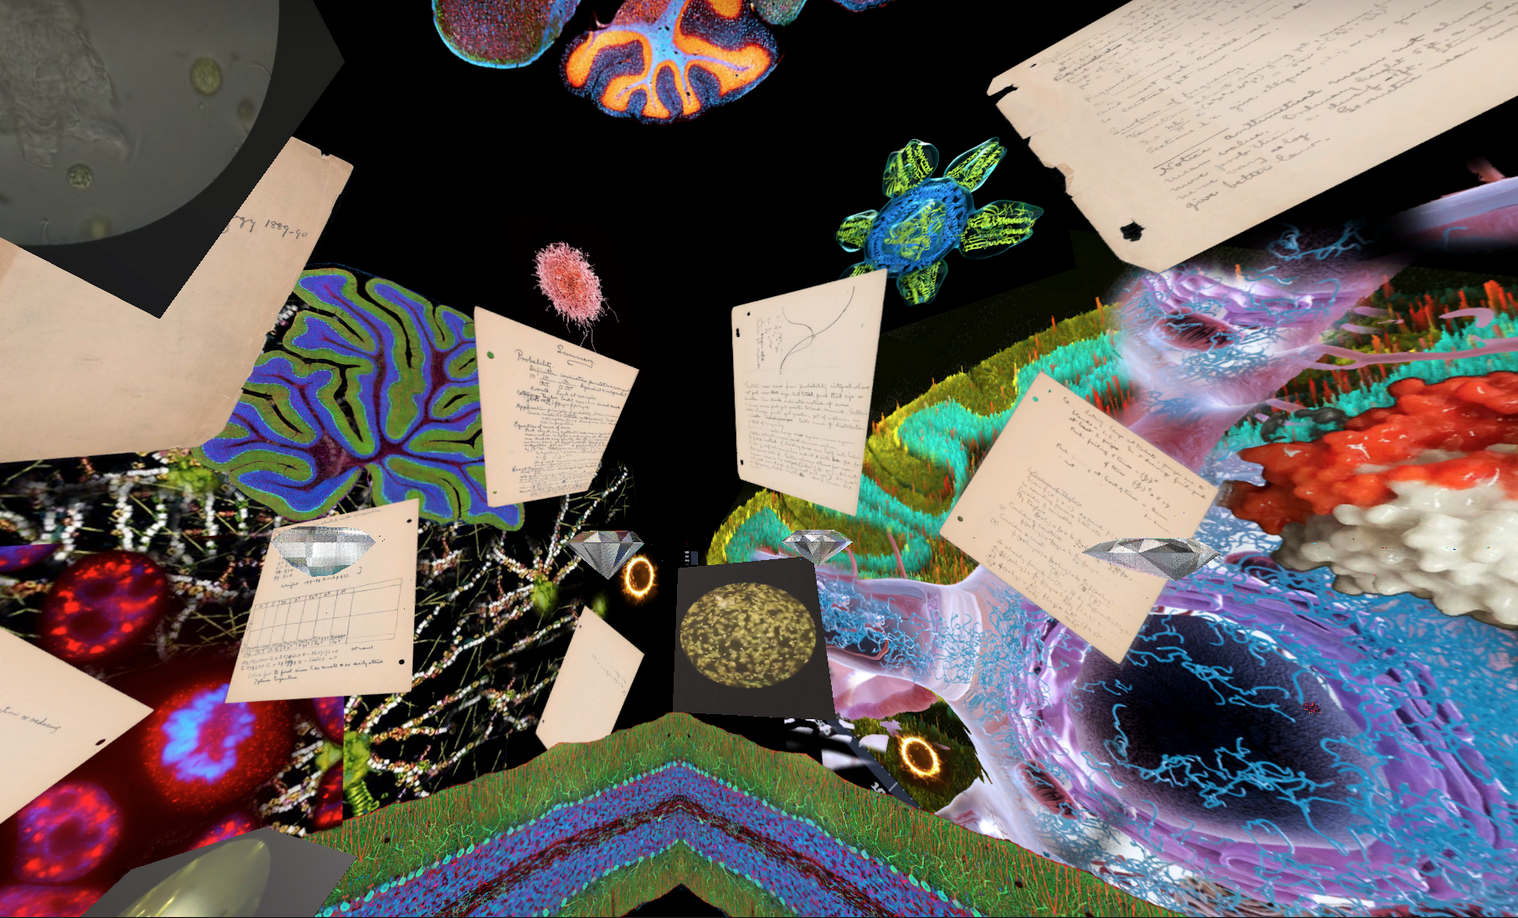 MIT Highlights Distinctive Collections Through “A Lab of One’s Own” Video Game